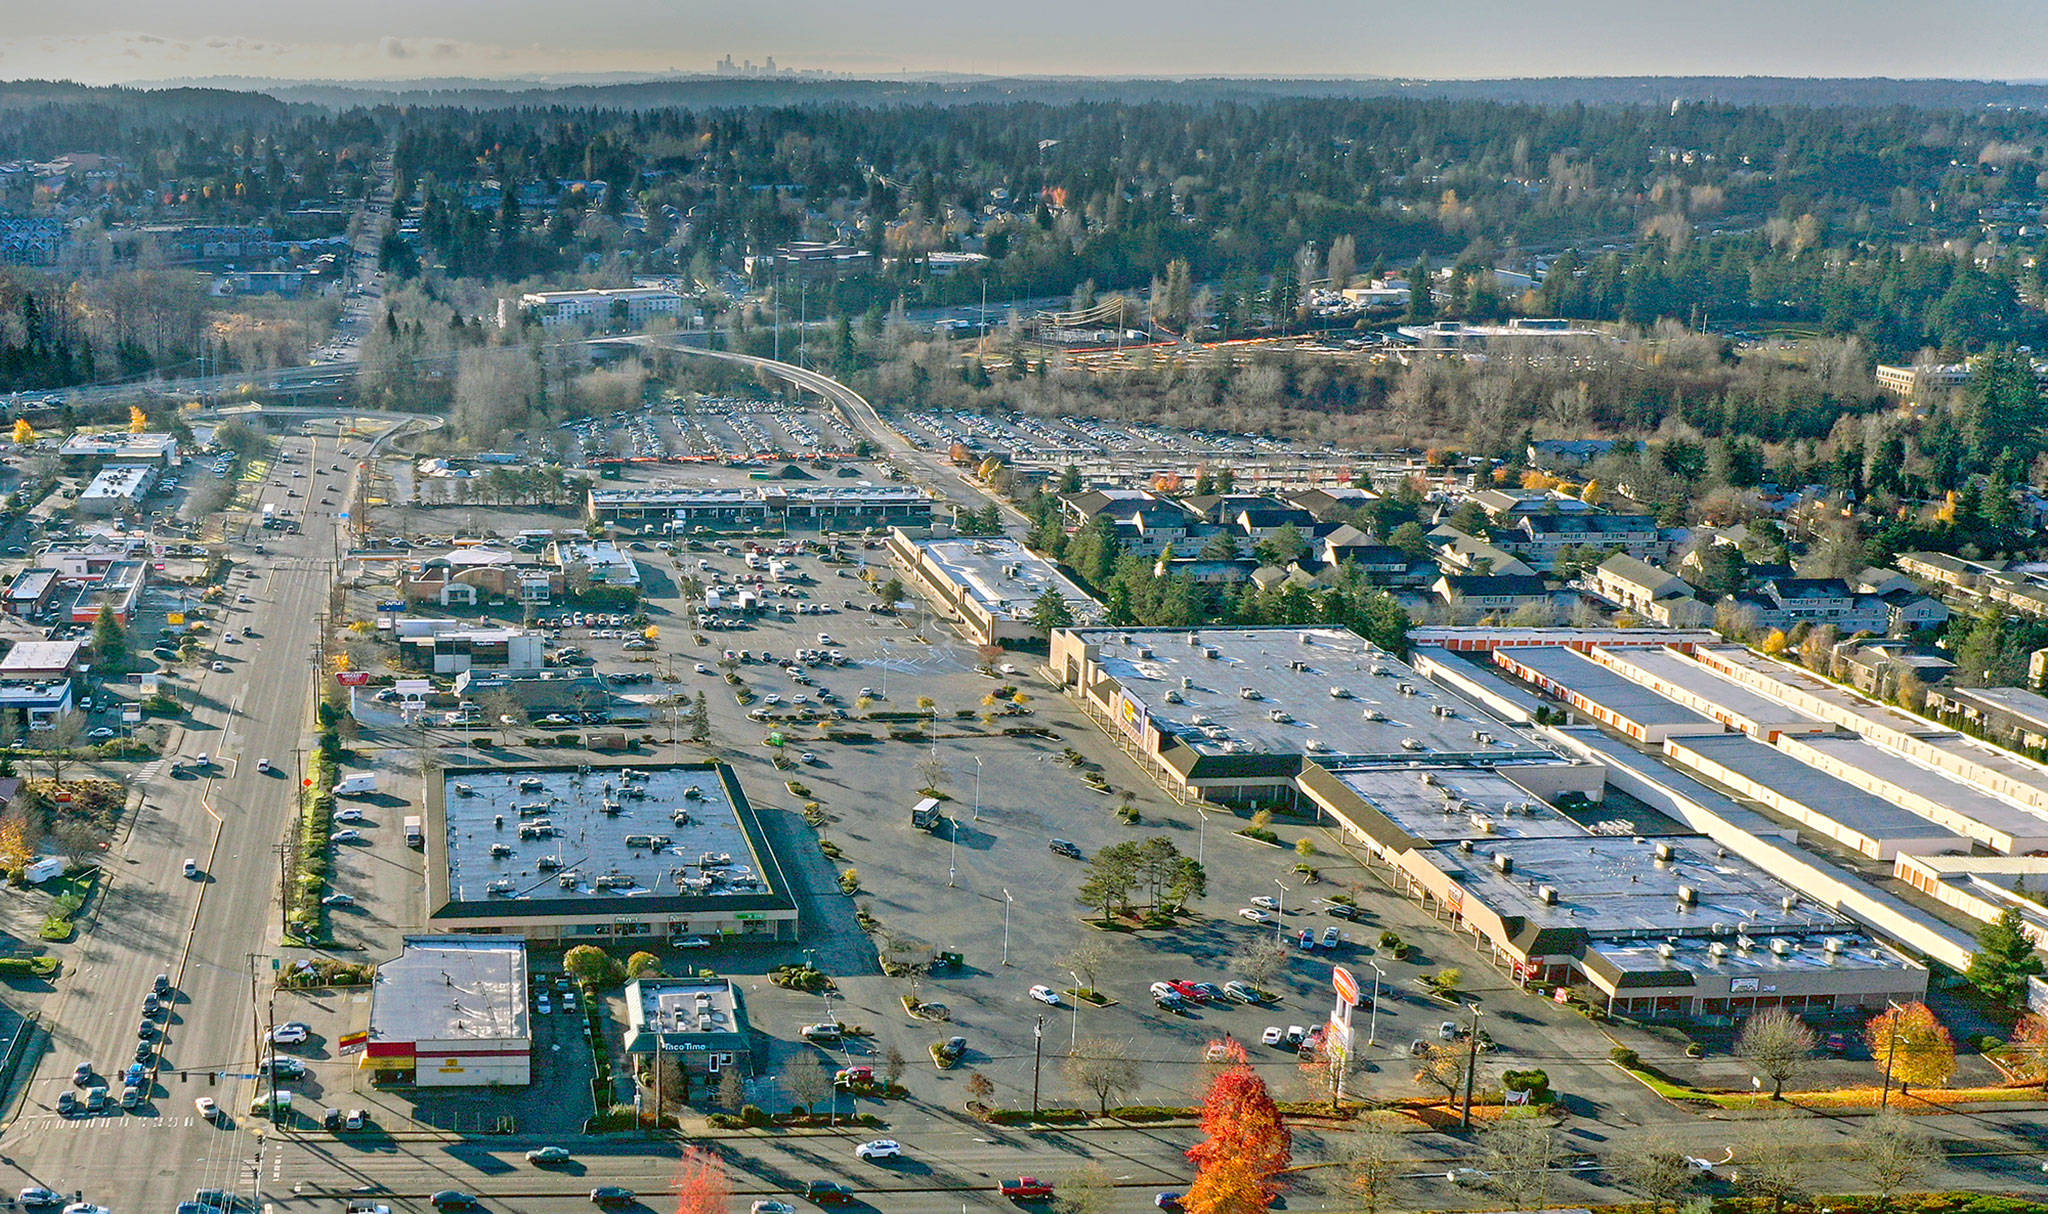 Site of the proposed Northline Village development in Lynnwood, with 44th Avenue West at left and 196th Street SW in the foreground. (Chuck Taylor / The Herald)